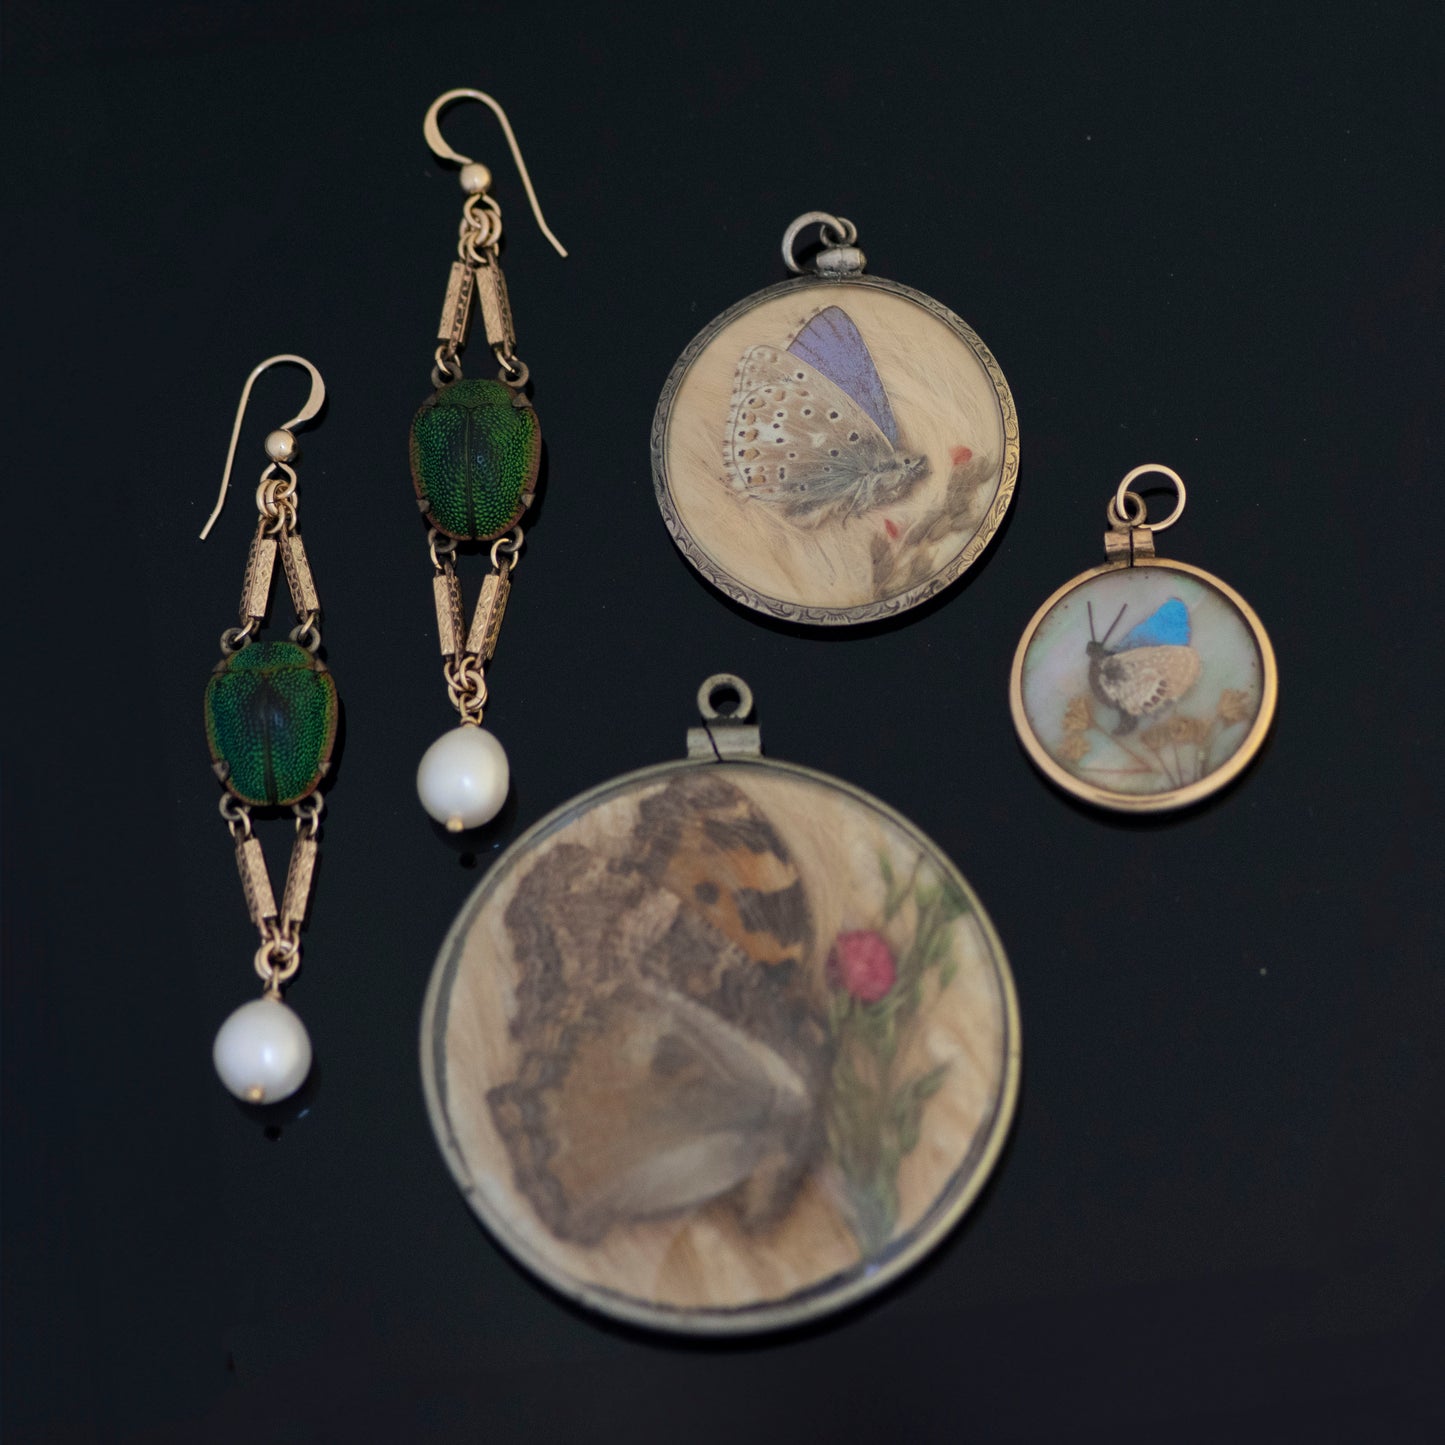 Antique Scarab Beetle Watch Chain Pearl Earrings and 3 pendants with preserved butterflies